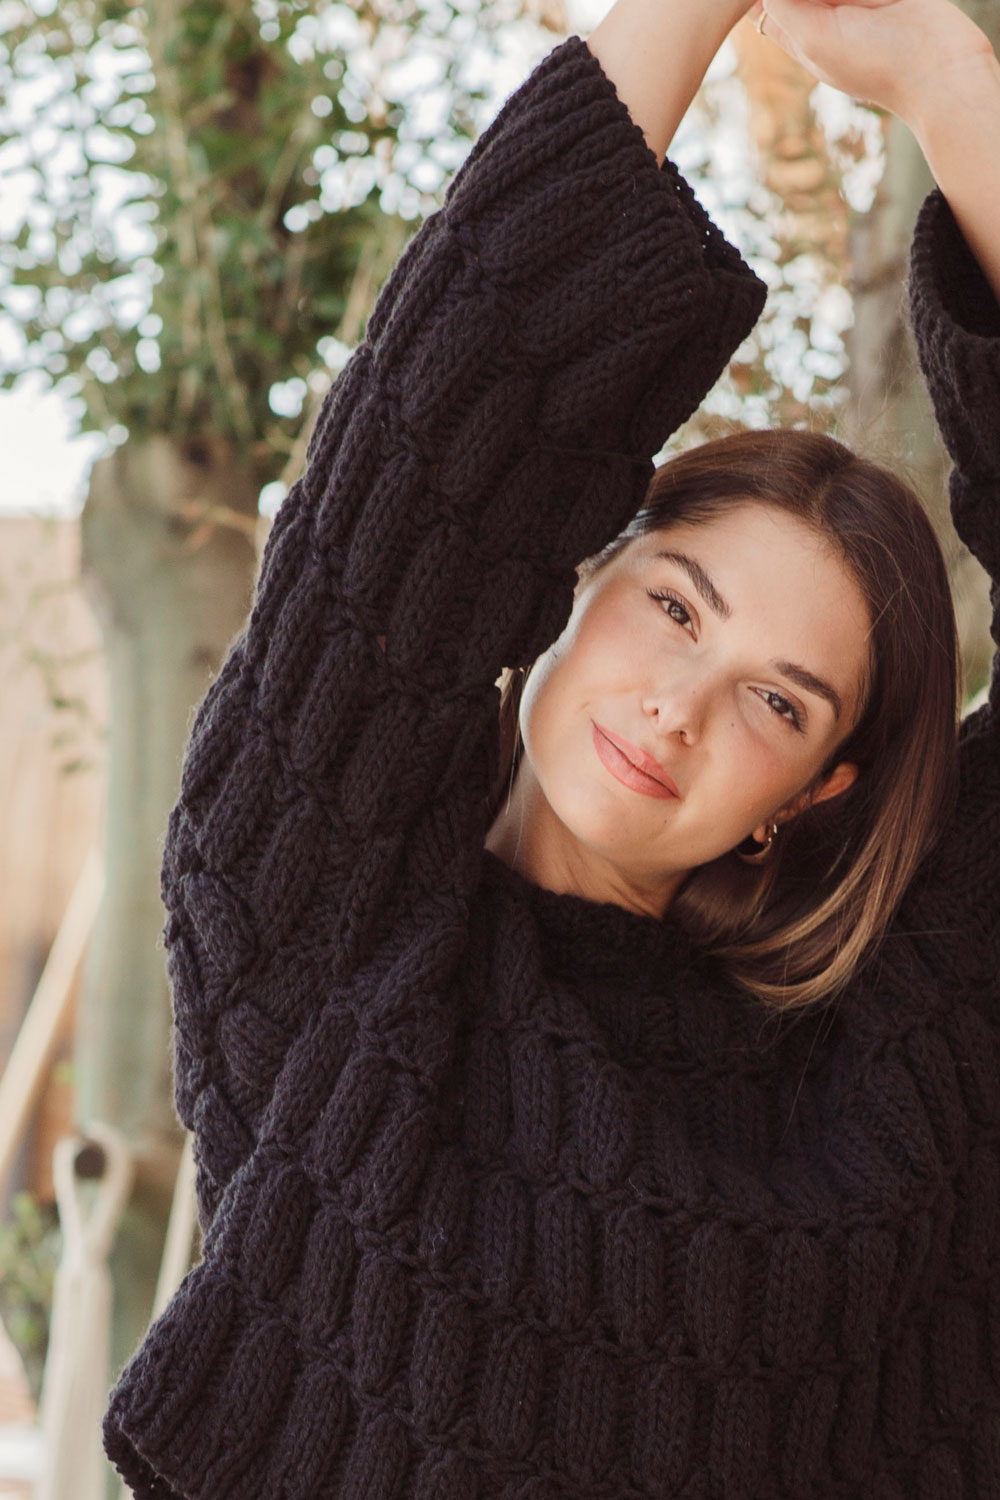 Sweater Knit Pattern easy and amazing – Through the Stitch